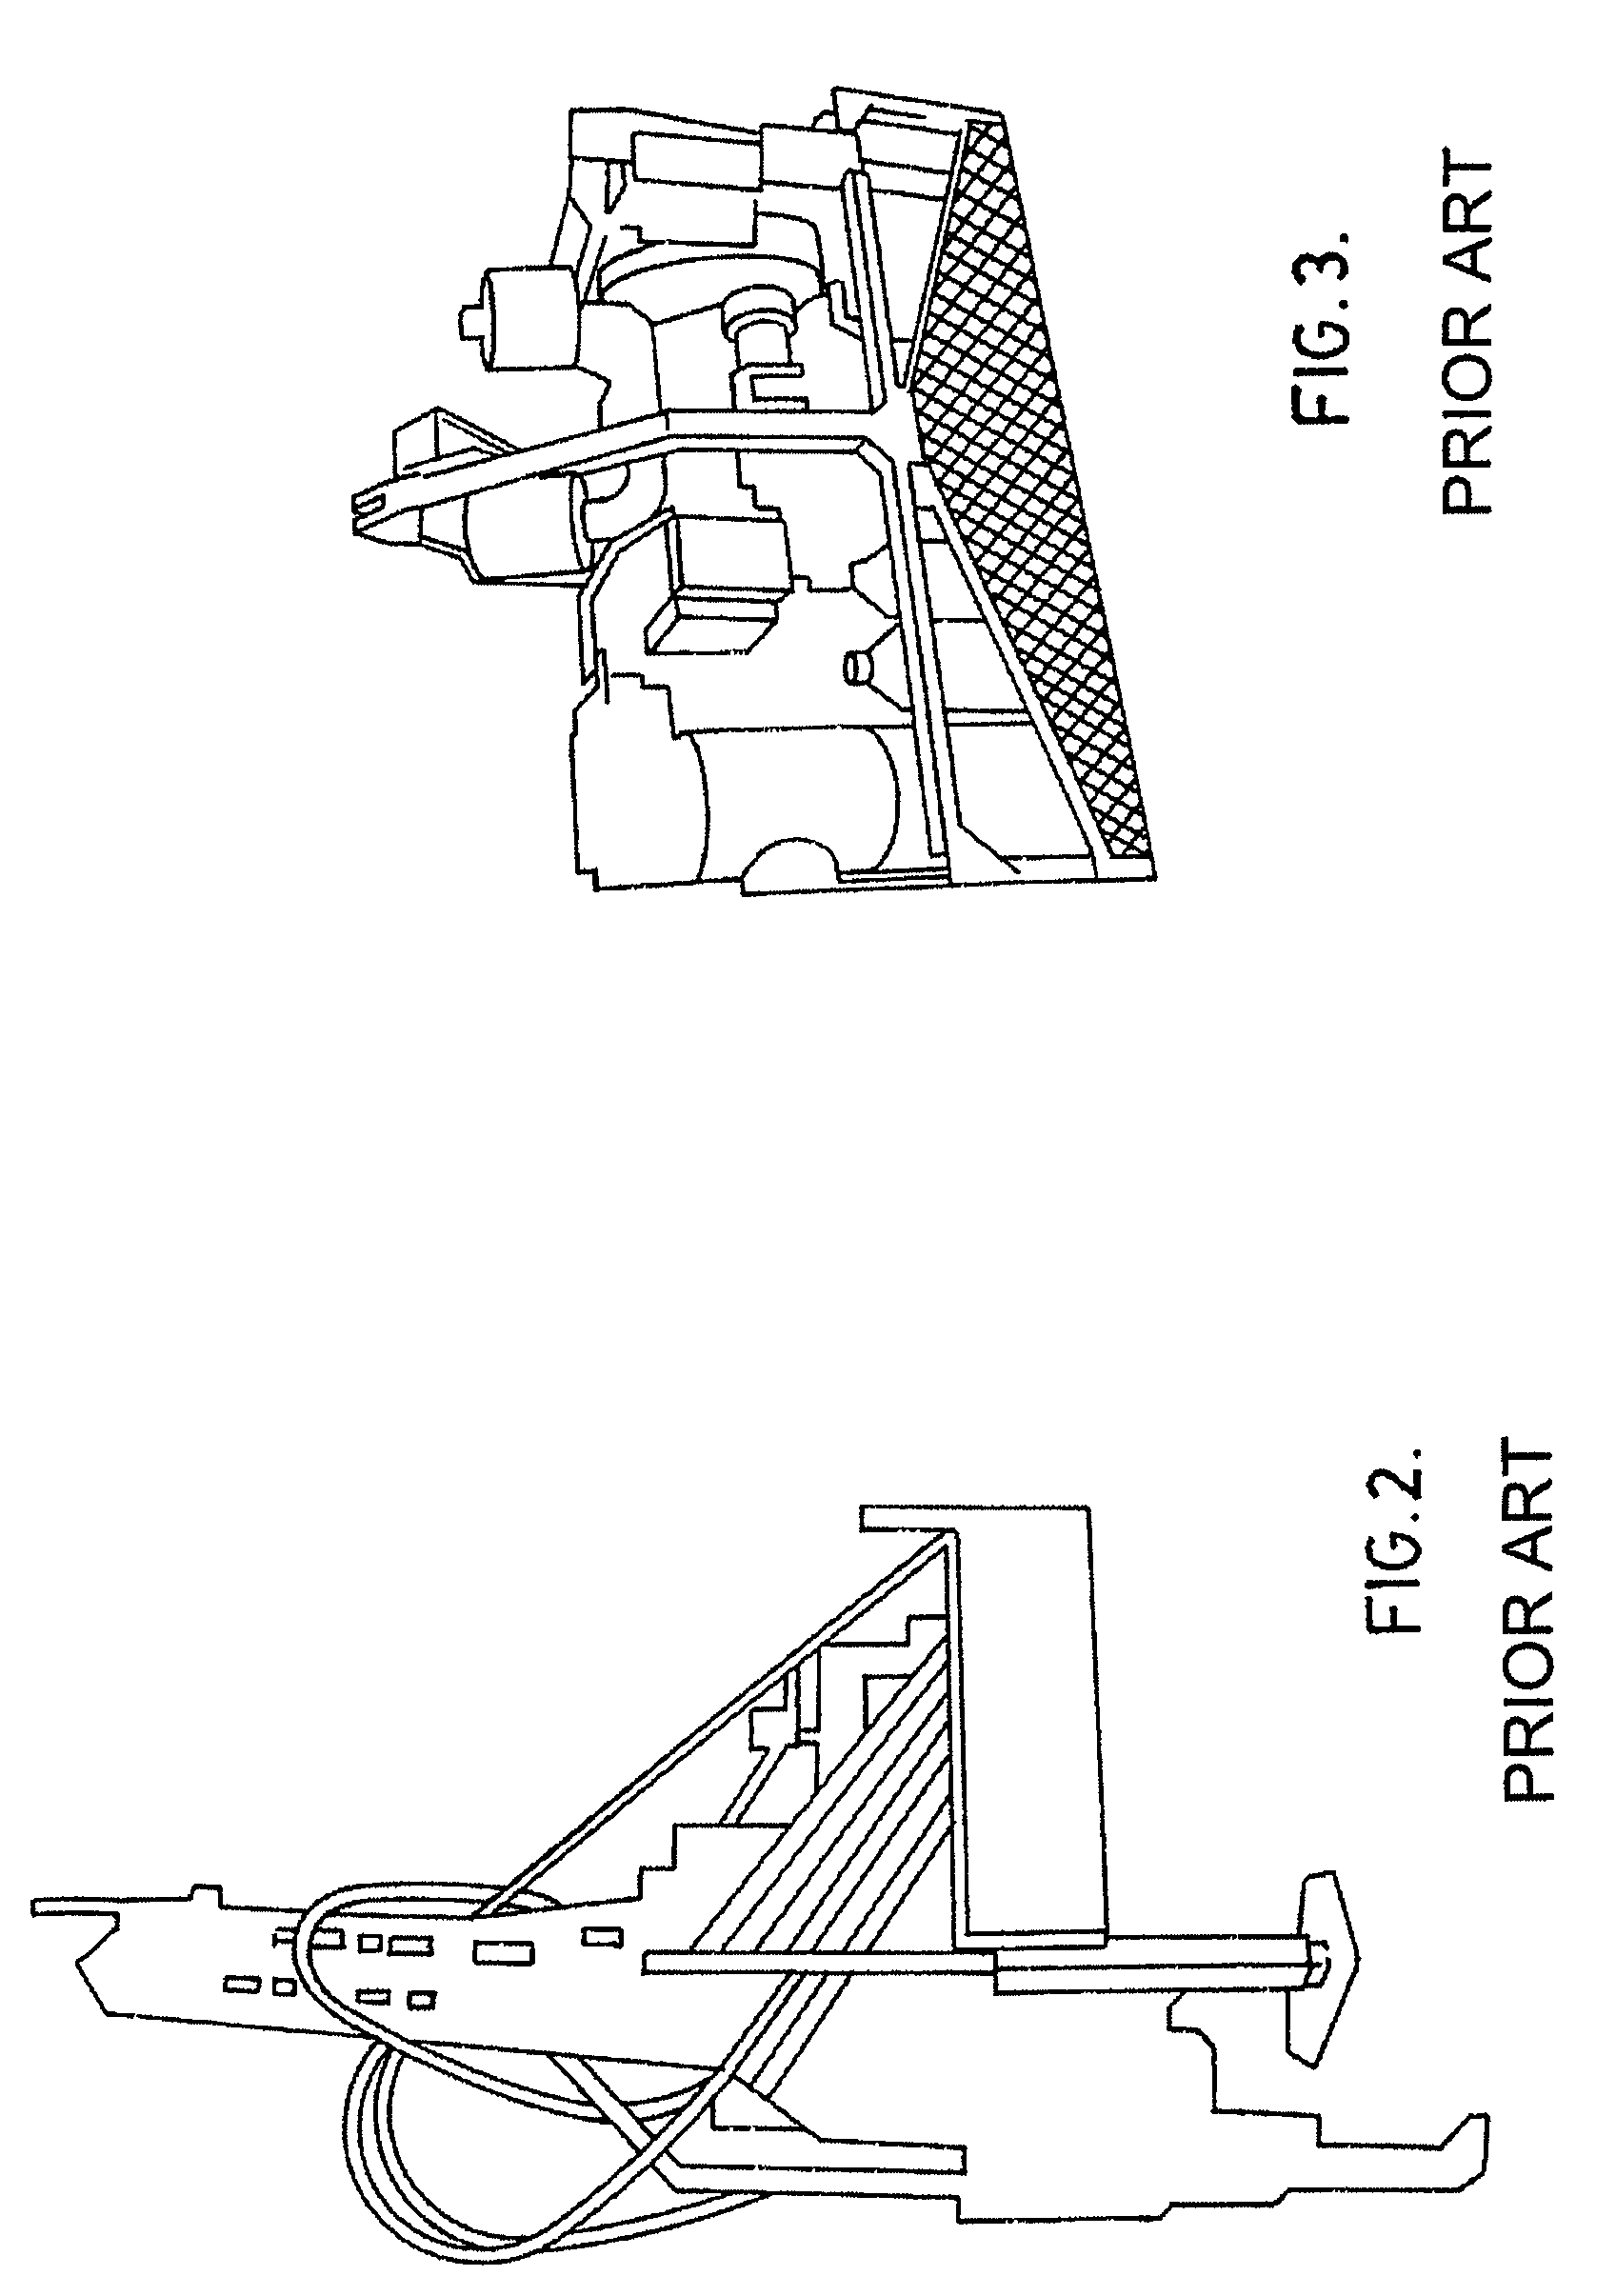 Method and system for helicopter portable drilling